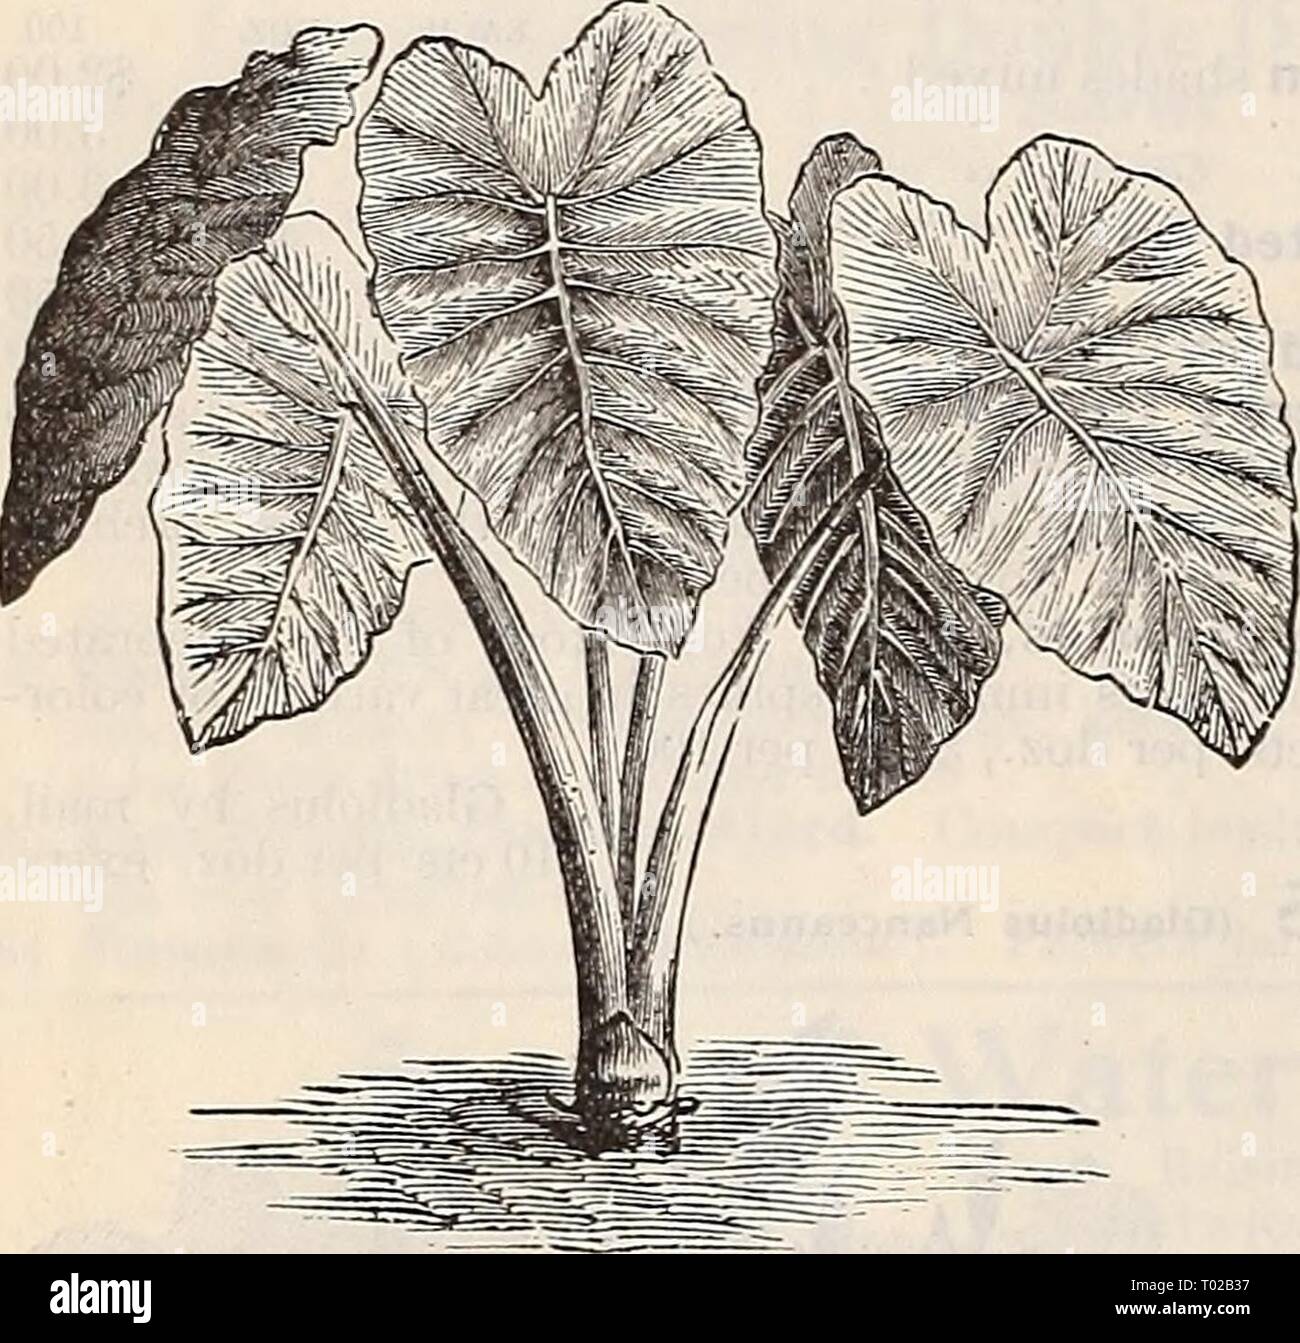 Dreer's garden calendar : 1897 . dreersgardencale1897henr Year: 1897  94 SUMMER FLOWERING BULBS. Amorphophallus Rivieri. Particularly handsome plant for growing either in clumps or as a soli- tary specimen. Should be planted in May in warm sunny situation in extra rich soil; the flowers appear before the leaves and rise to a height of 2 feet and resembles a gigantic black Calla. This is soon followed by the massive tropical looking leaves supported by thick beautifully marbled stems. (See cut.) 30 cts. each, 4 for $1.00. AMARYLLIS FORMOSISSIMA. (Jacobean Lily.) Exceedingly free flowering, bloo Stock Photo